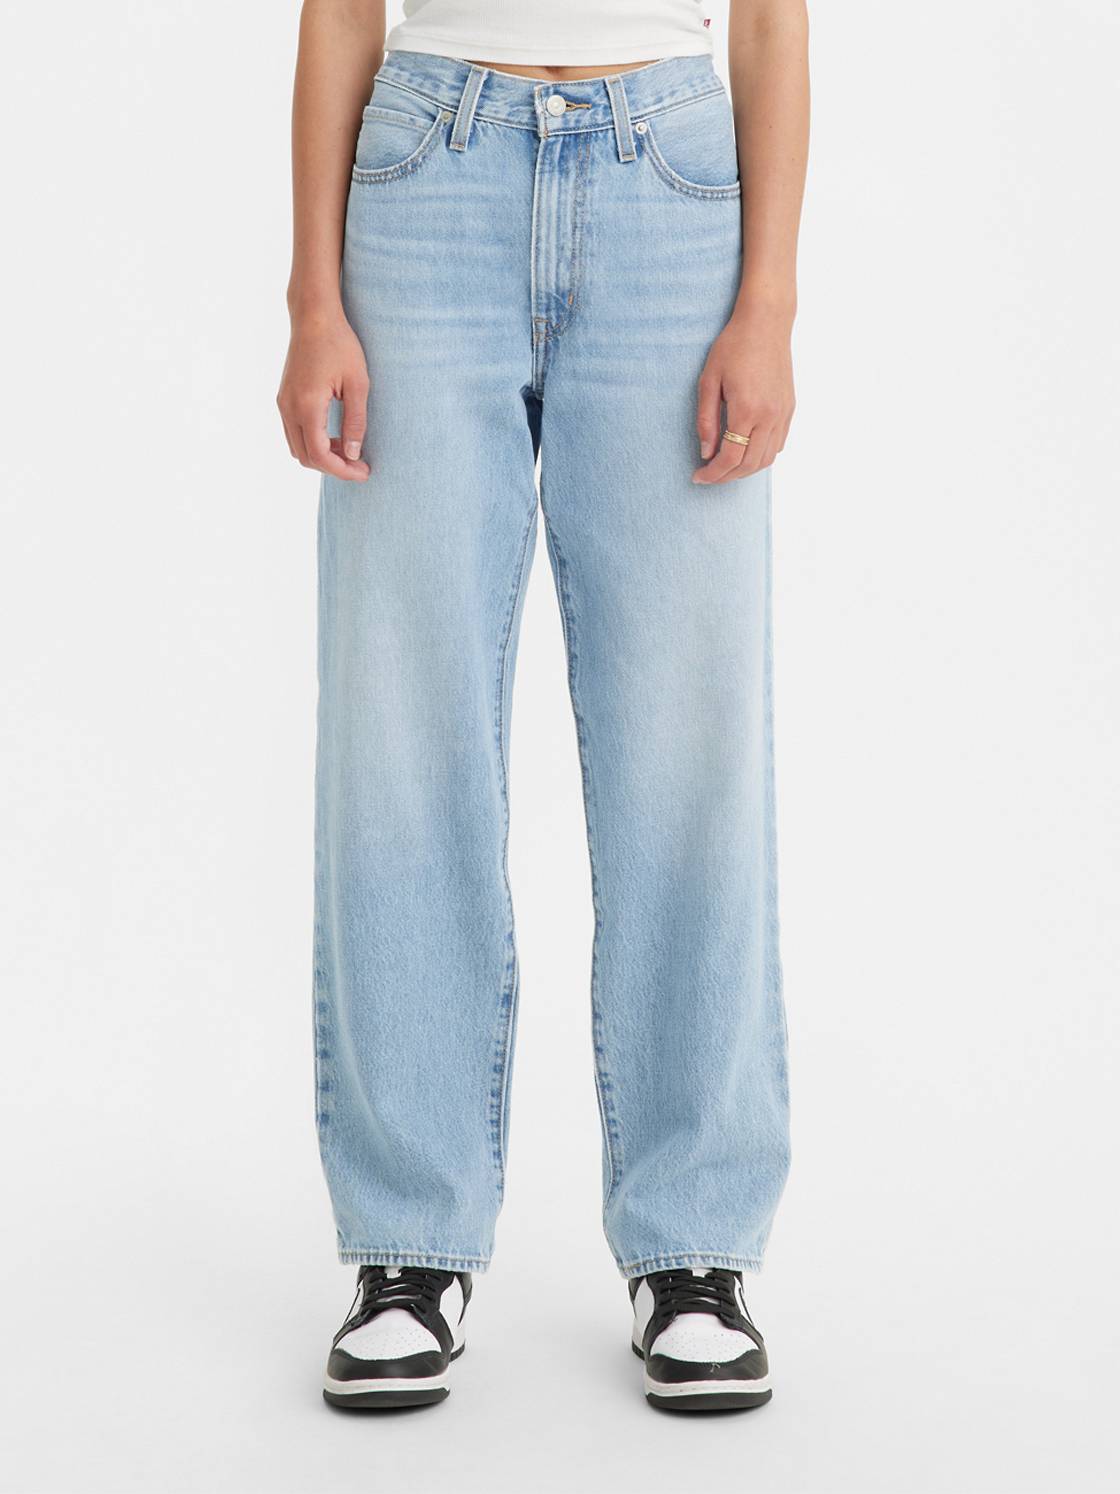 '94 Baggy Jeans 1